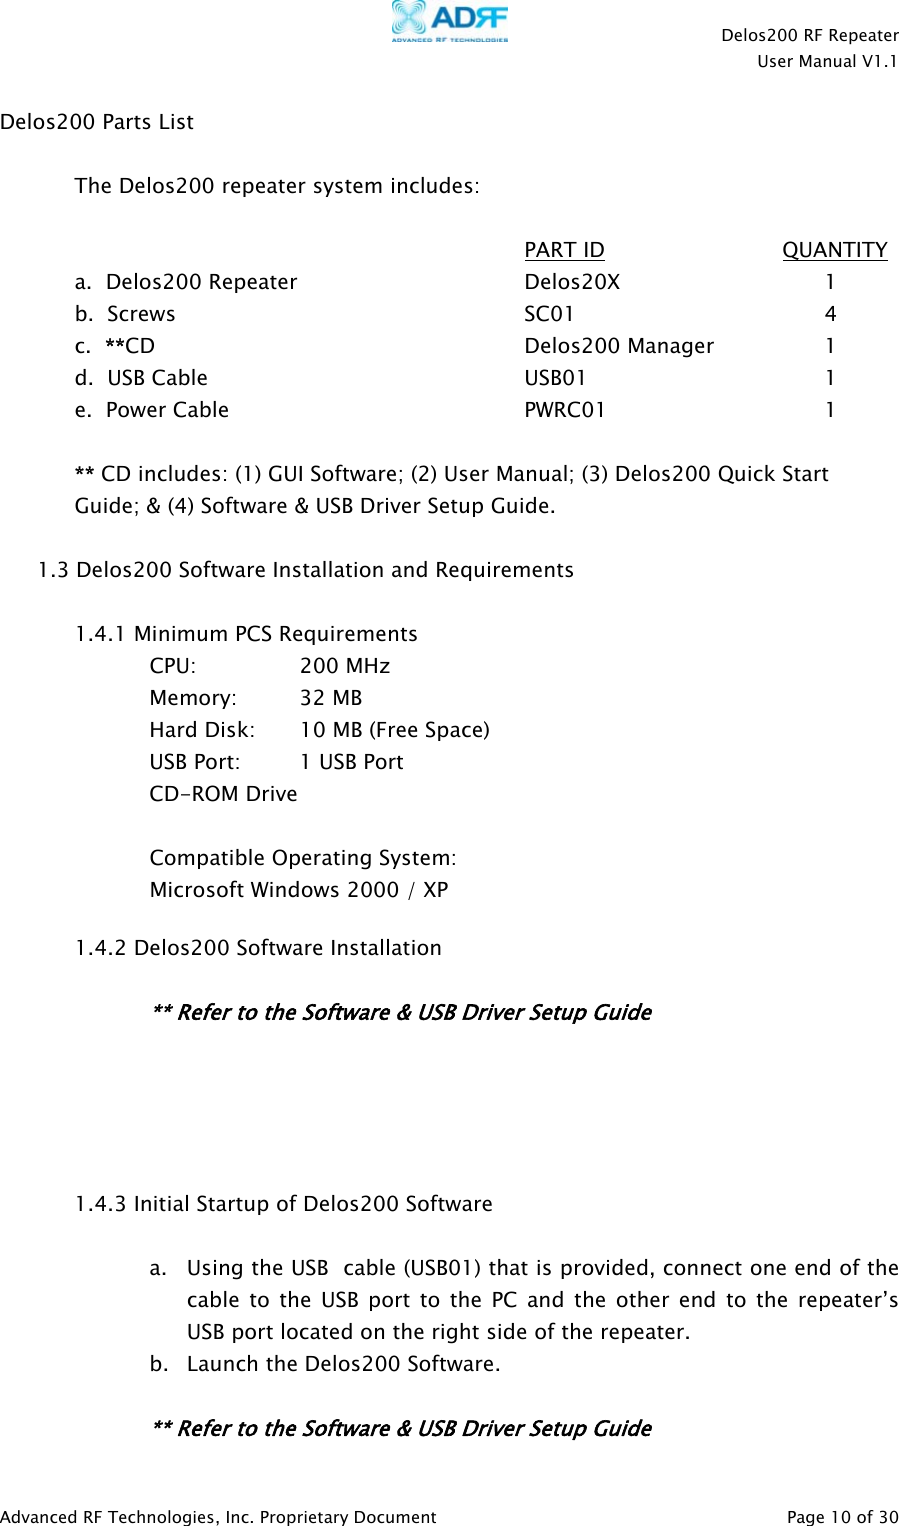    Delos200 RF Repeater  User Manual V1.1  Advanced RF Technologies, Inc. Proprietary Document   Page 10 of 30  Delos200 Parts List  The Delos200 repeater system includes:        PART ID              QUANTITY a.  Delos200 Repeater    Delos20X   1  b.  Screws      SC01    4 c.  **CD     Delos200 Manager  1 d.  USB Cable     USB01    1  e.  Power Cable    PWRC01   1  ** CD includes: (1) GUI Software; (2) User Manual; (3) Delos200 Quick Start Guide; &amp; (4) Software &amp; USB Driver Setup Guide.  1.3 Delos200 Software Installation and Requirements  1.4.1 Minimum PCS Requirements CPU:     200 MHz   Memory: 32 MB     Hard Disk:  10 MB (Free Space)     USB Port:    1 USB Port   CD-ROM Drive   Compatible Operating System: Microsoft Windows 2000 / XP   1.4.2 Delos200 Software Installation  ** Refer to the Software &amp; USB Driver Setup Guide      1.4.3 Initial Startup of Delos200 Software    a. Using the USB  cable (USB01) that is provided, connect one end of the cable to the USB port to the PC and the other end to the repeater’s USB port located on the right side of the repeater. b. Launch the Delos200 Software.  ** Refer to the Software &amp; USB Driver Setup Guide 